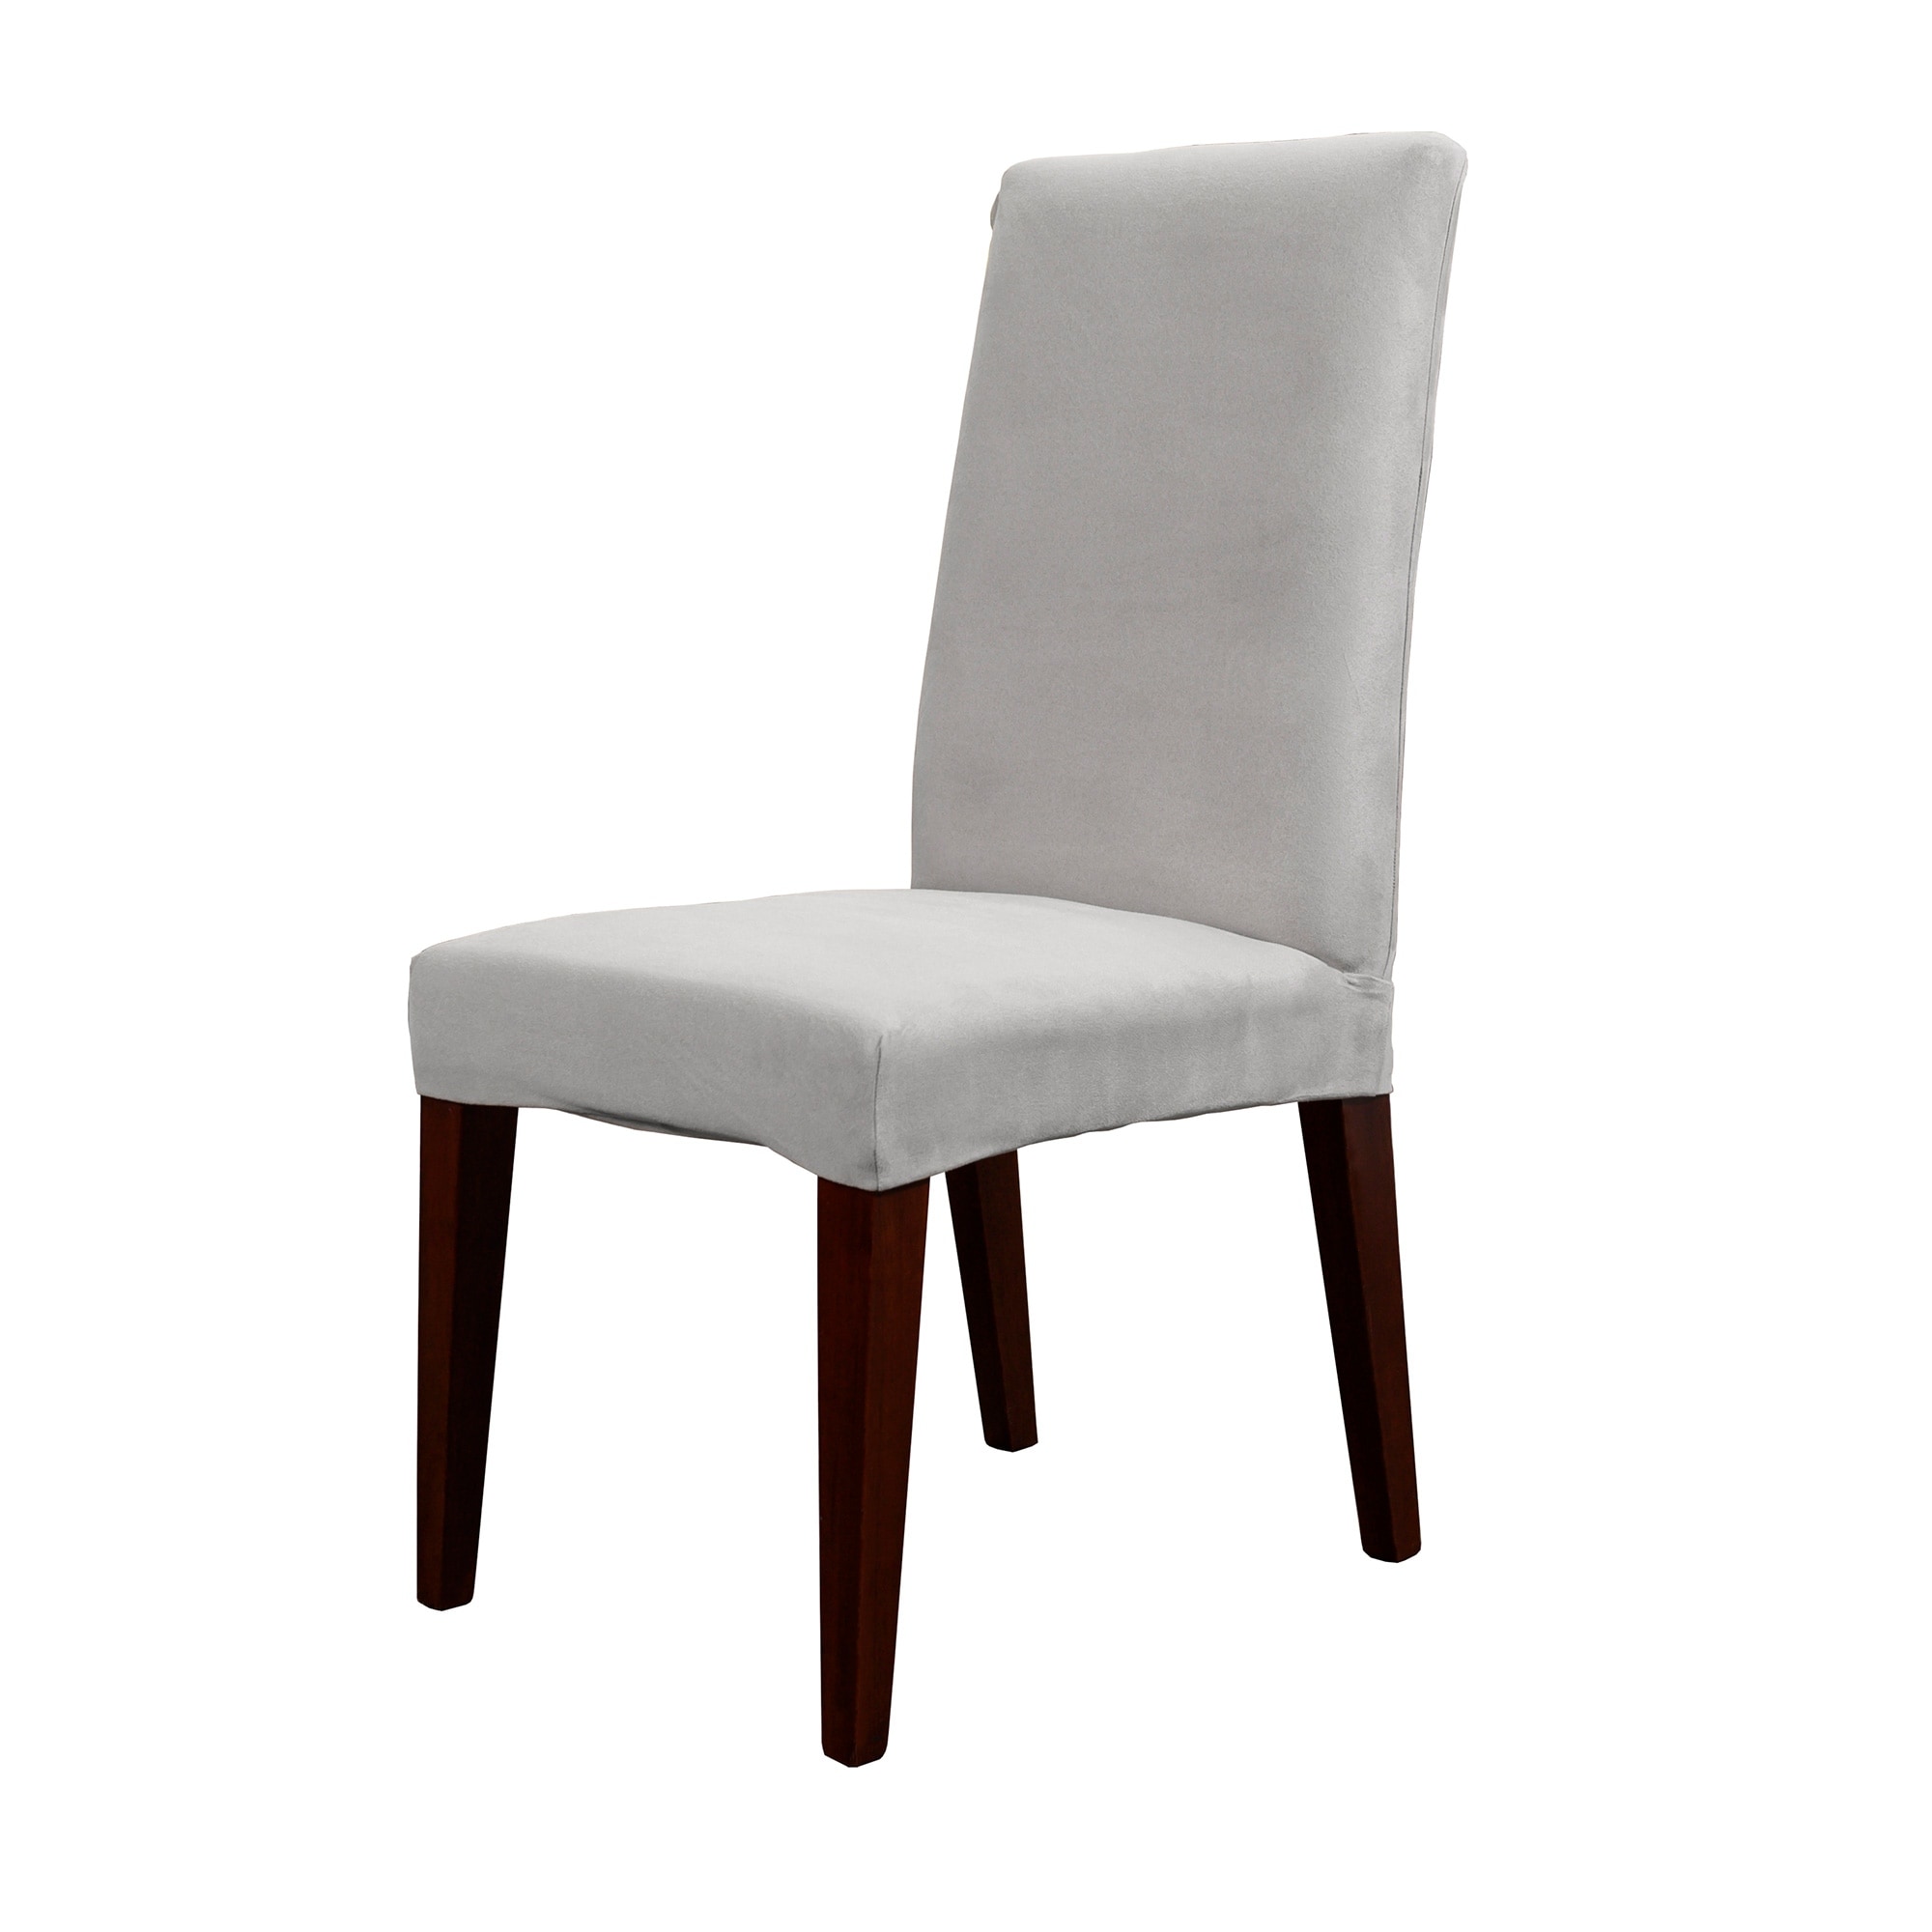 NEW Sure Fit Monaco White/Midnight Shorty Dining Room Chair Slipcover 